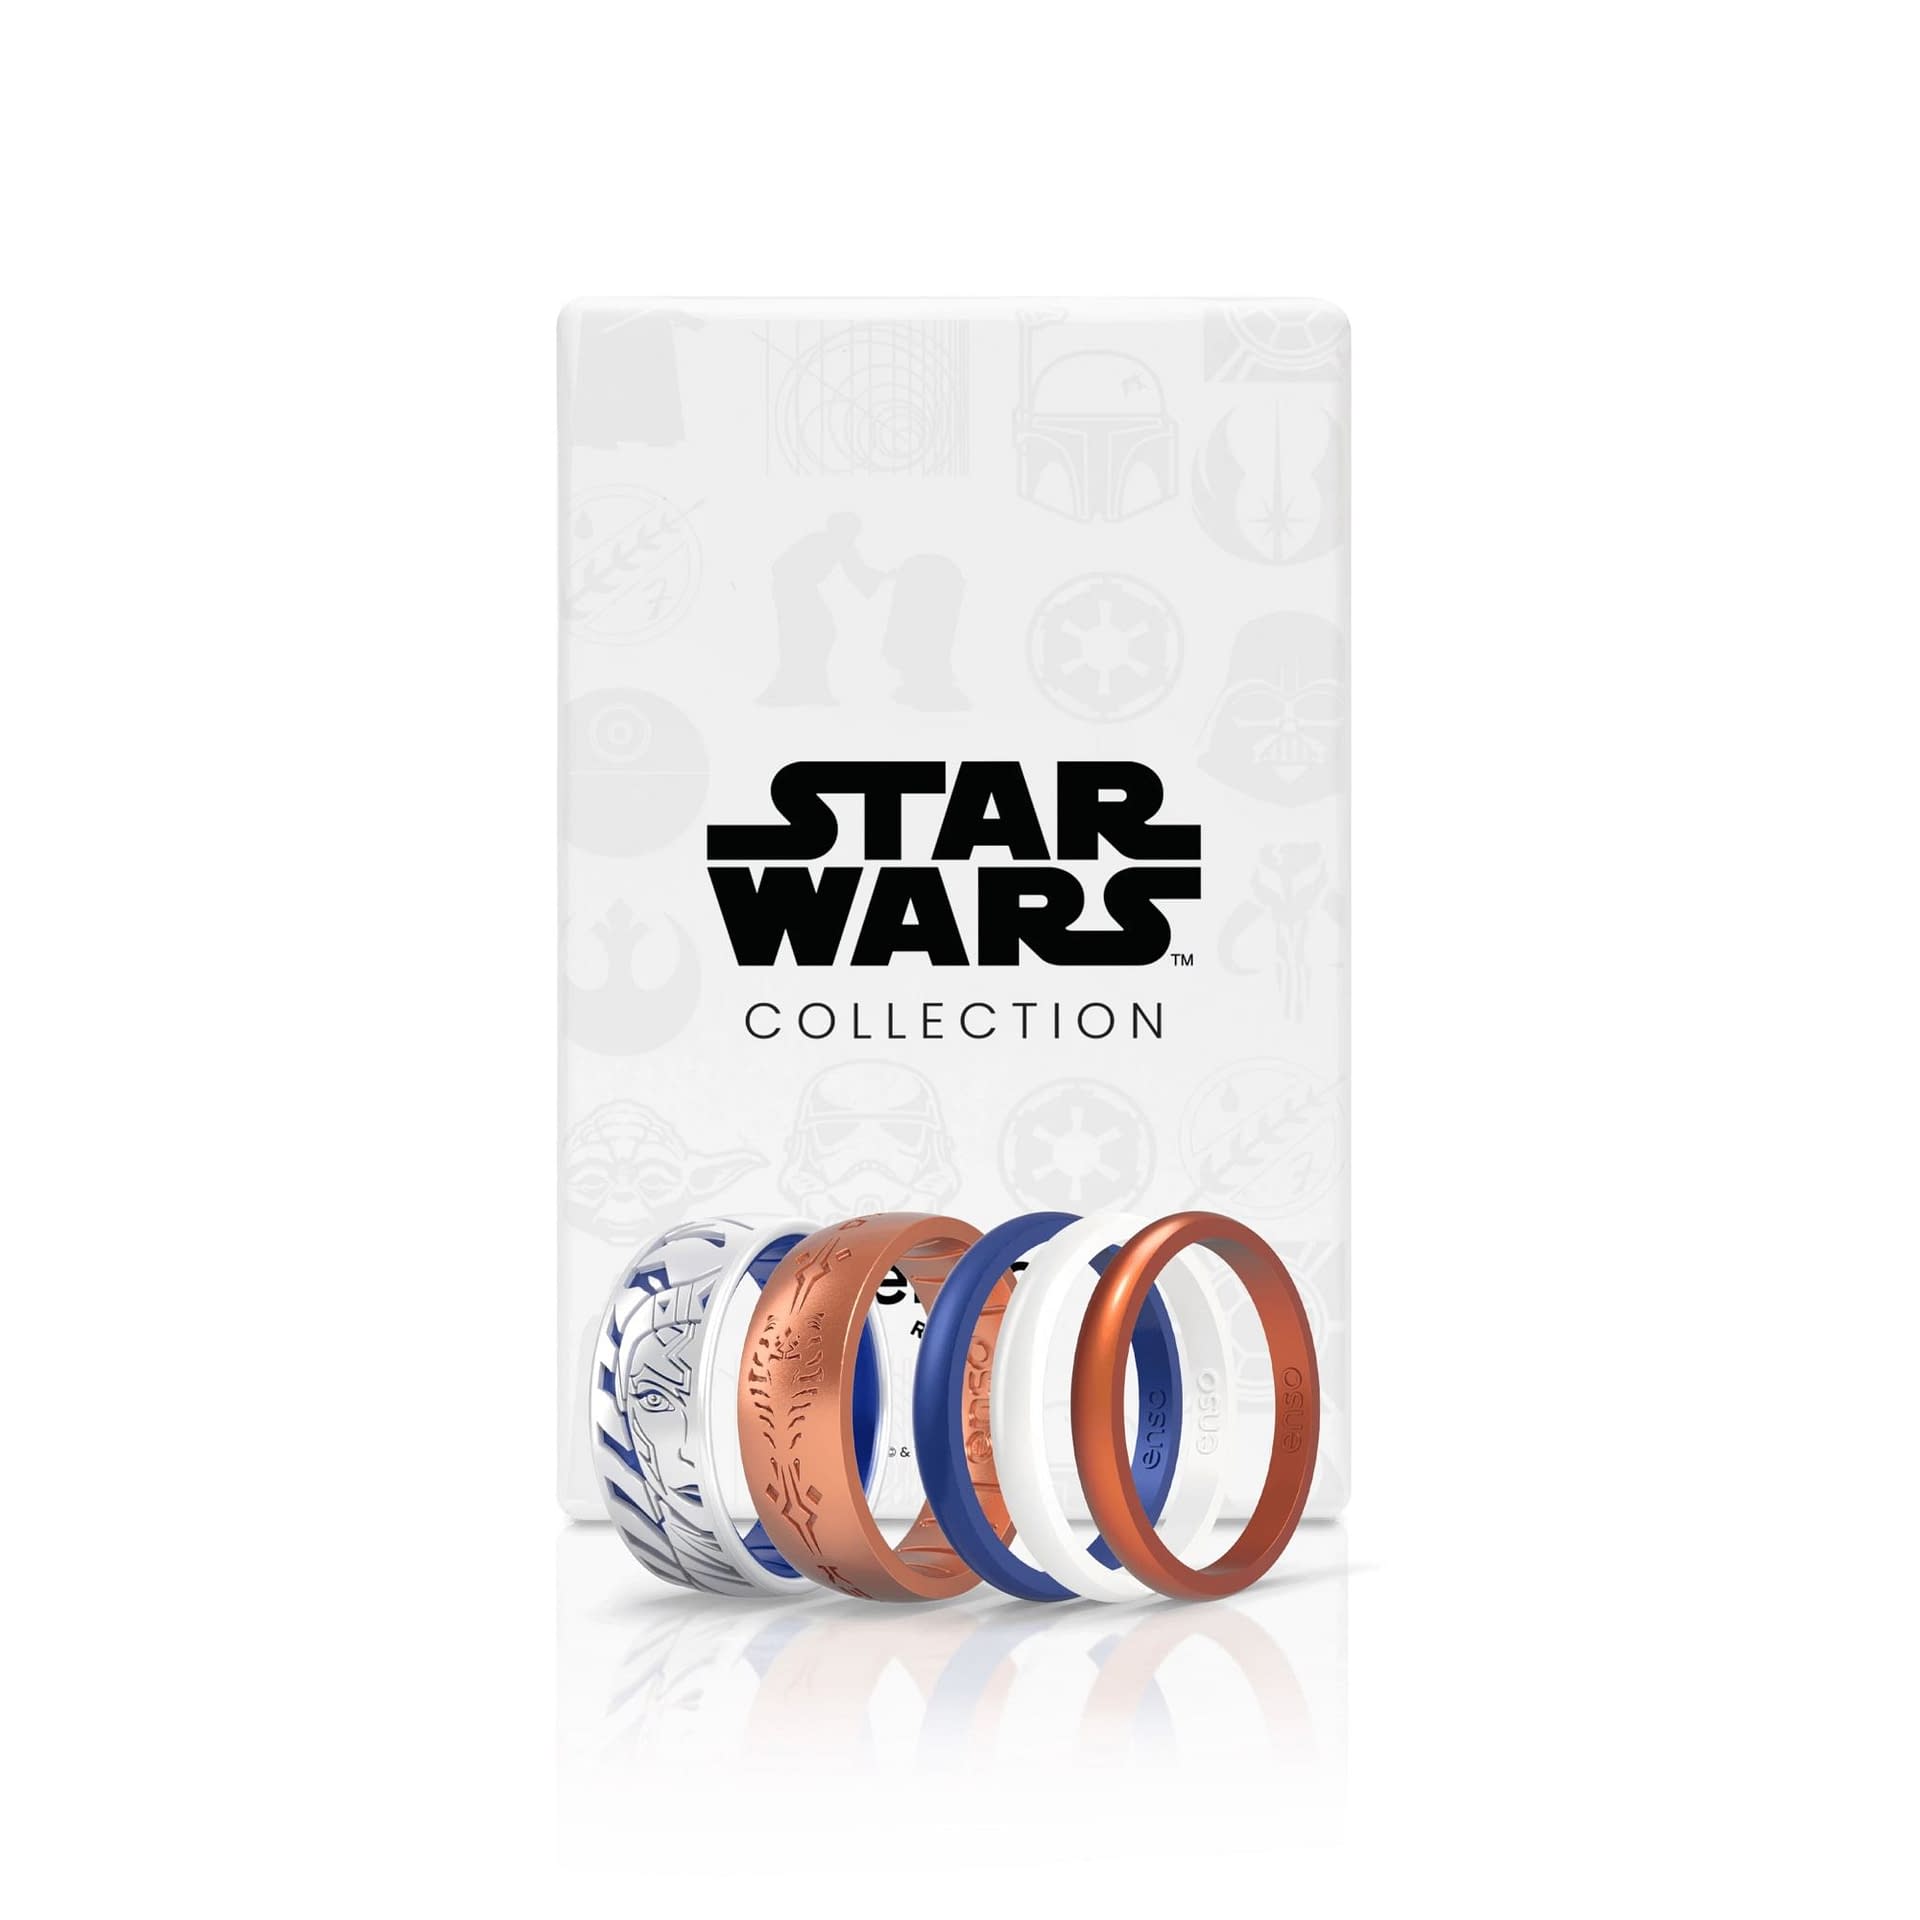 New Star Wars x Enso Rings Ahsoka Tano Collection Available Now - Jedi News